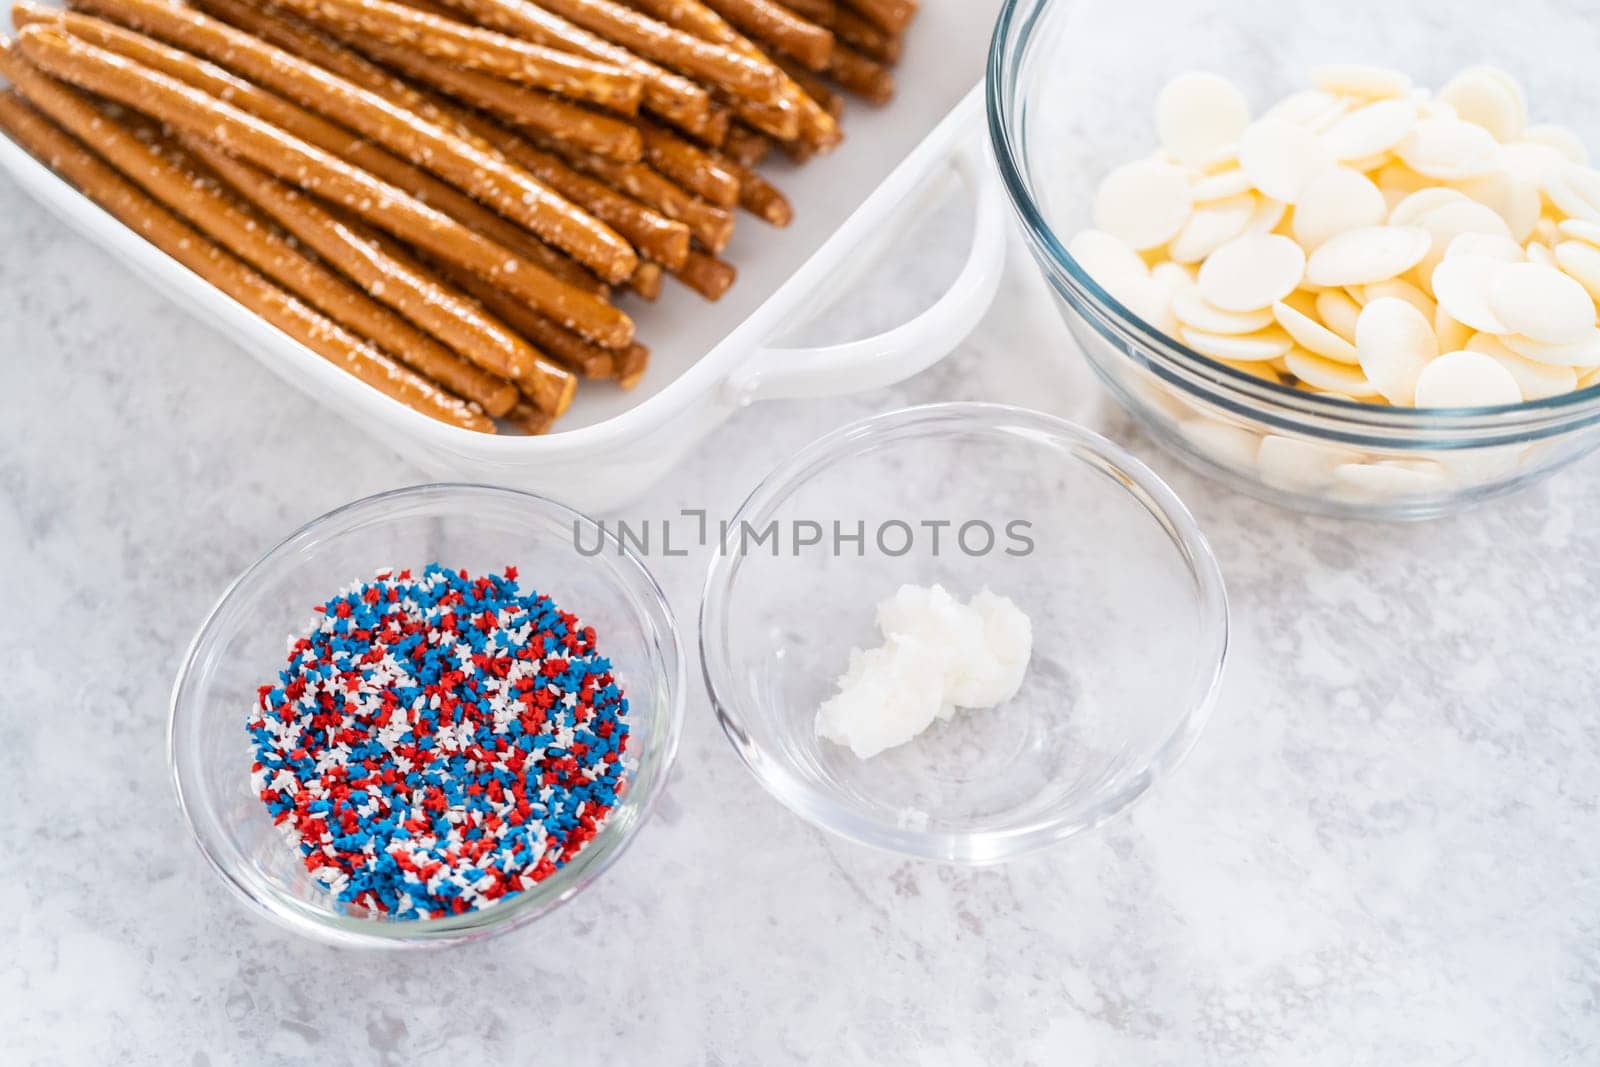 Ingredients in glass mixing bowls to prepare chocolate dipped pretzel rods for the July 4th celebration.